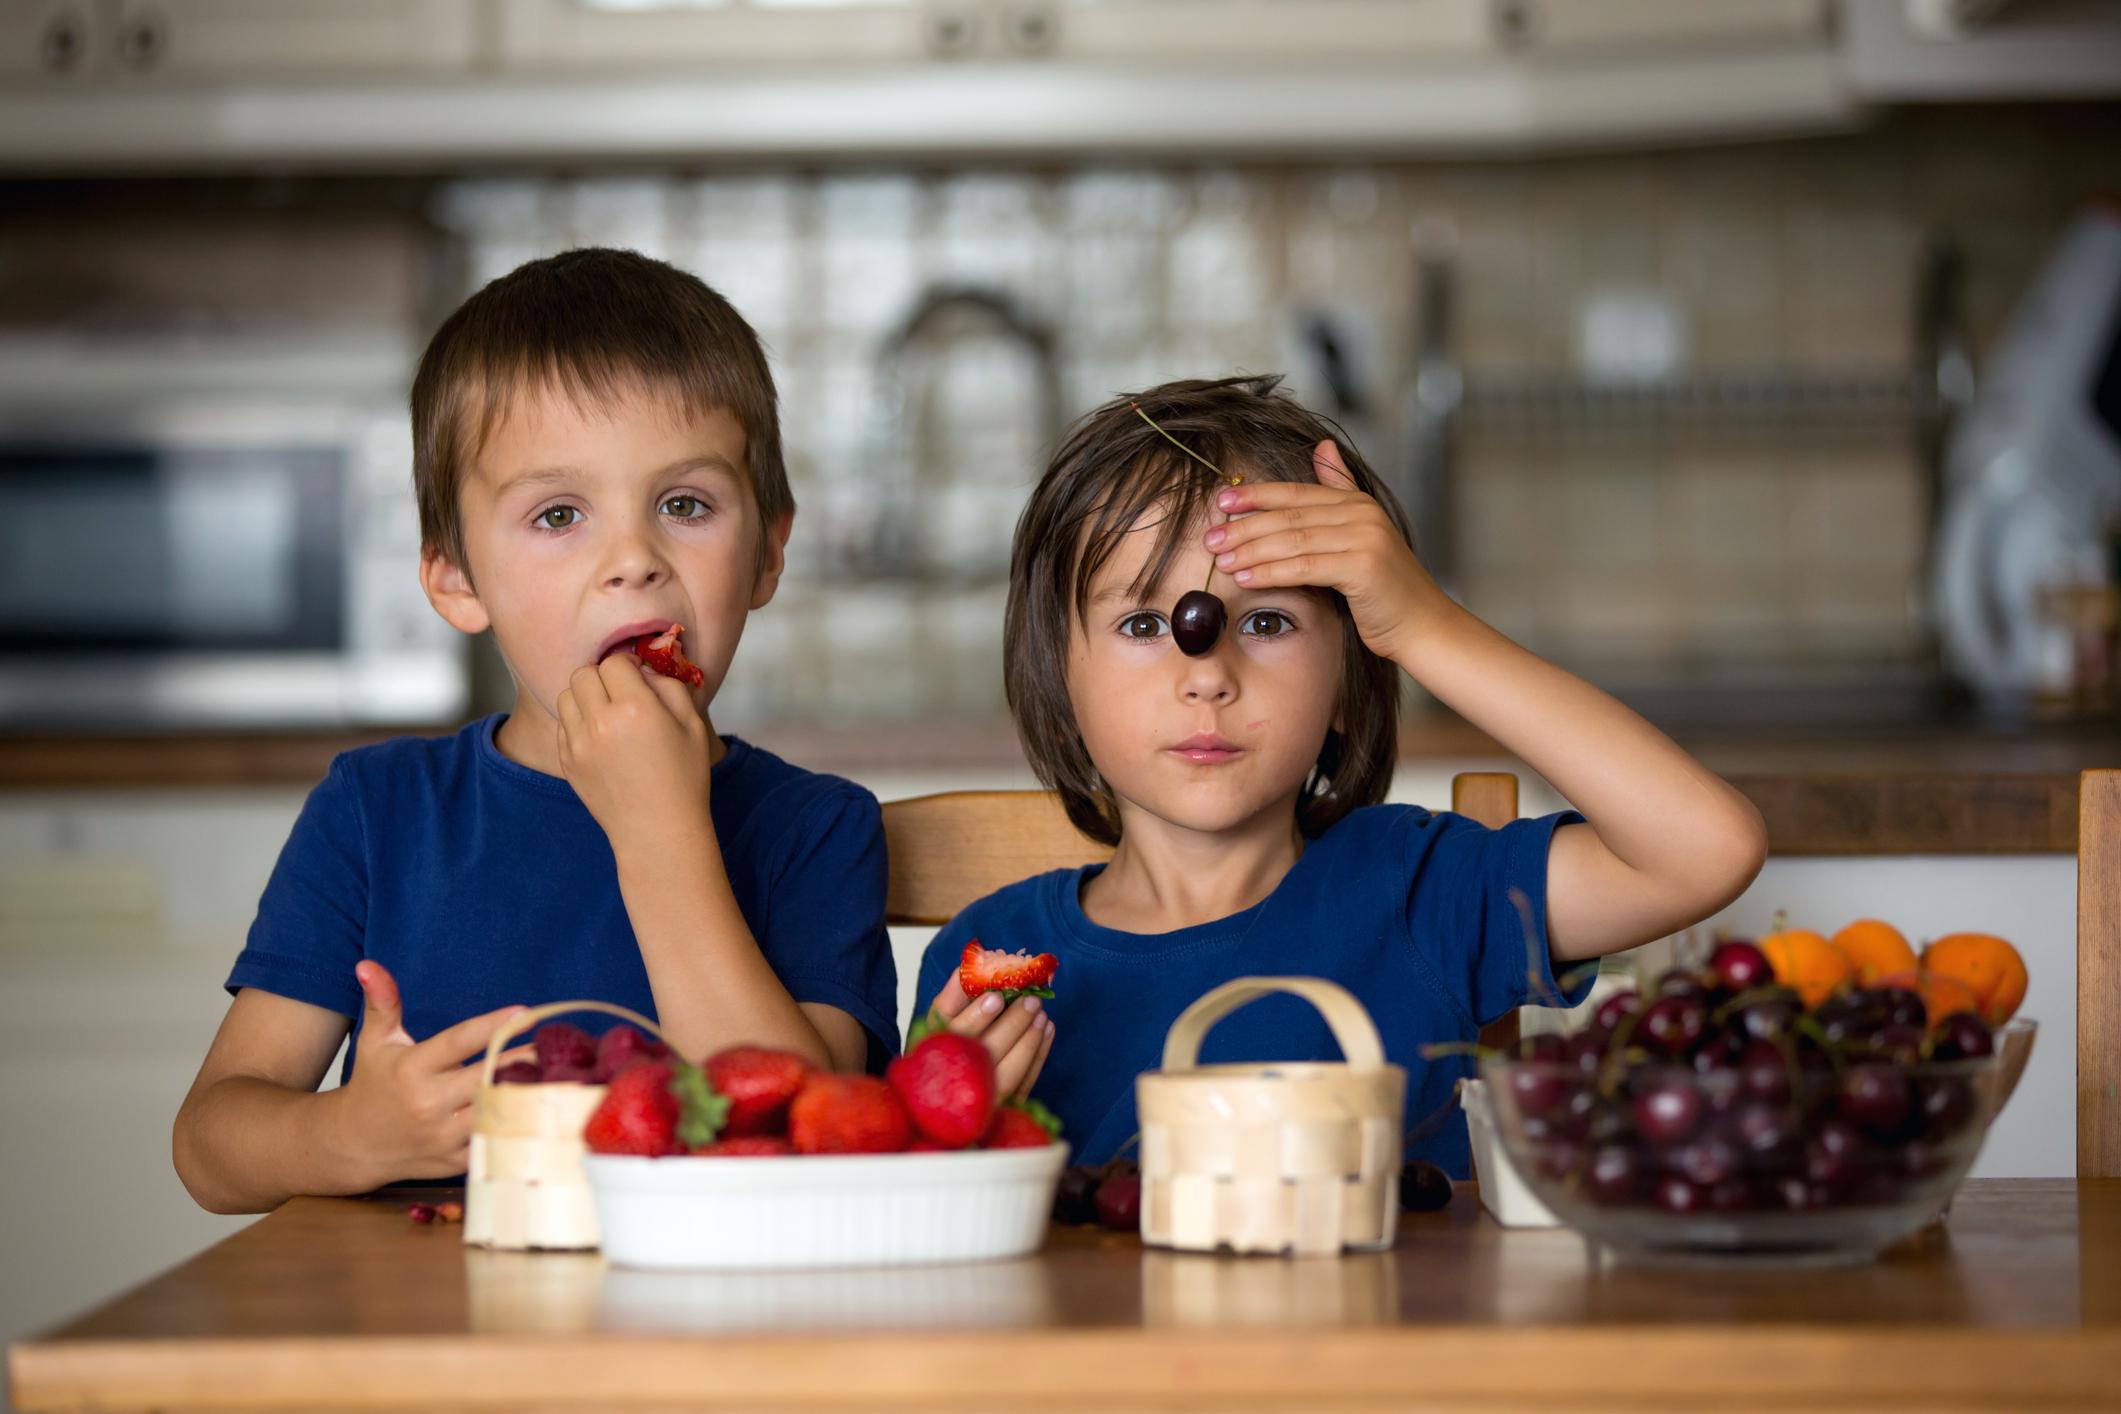 5 healthy snack ideas for your child